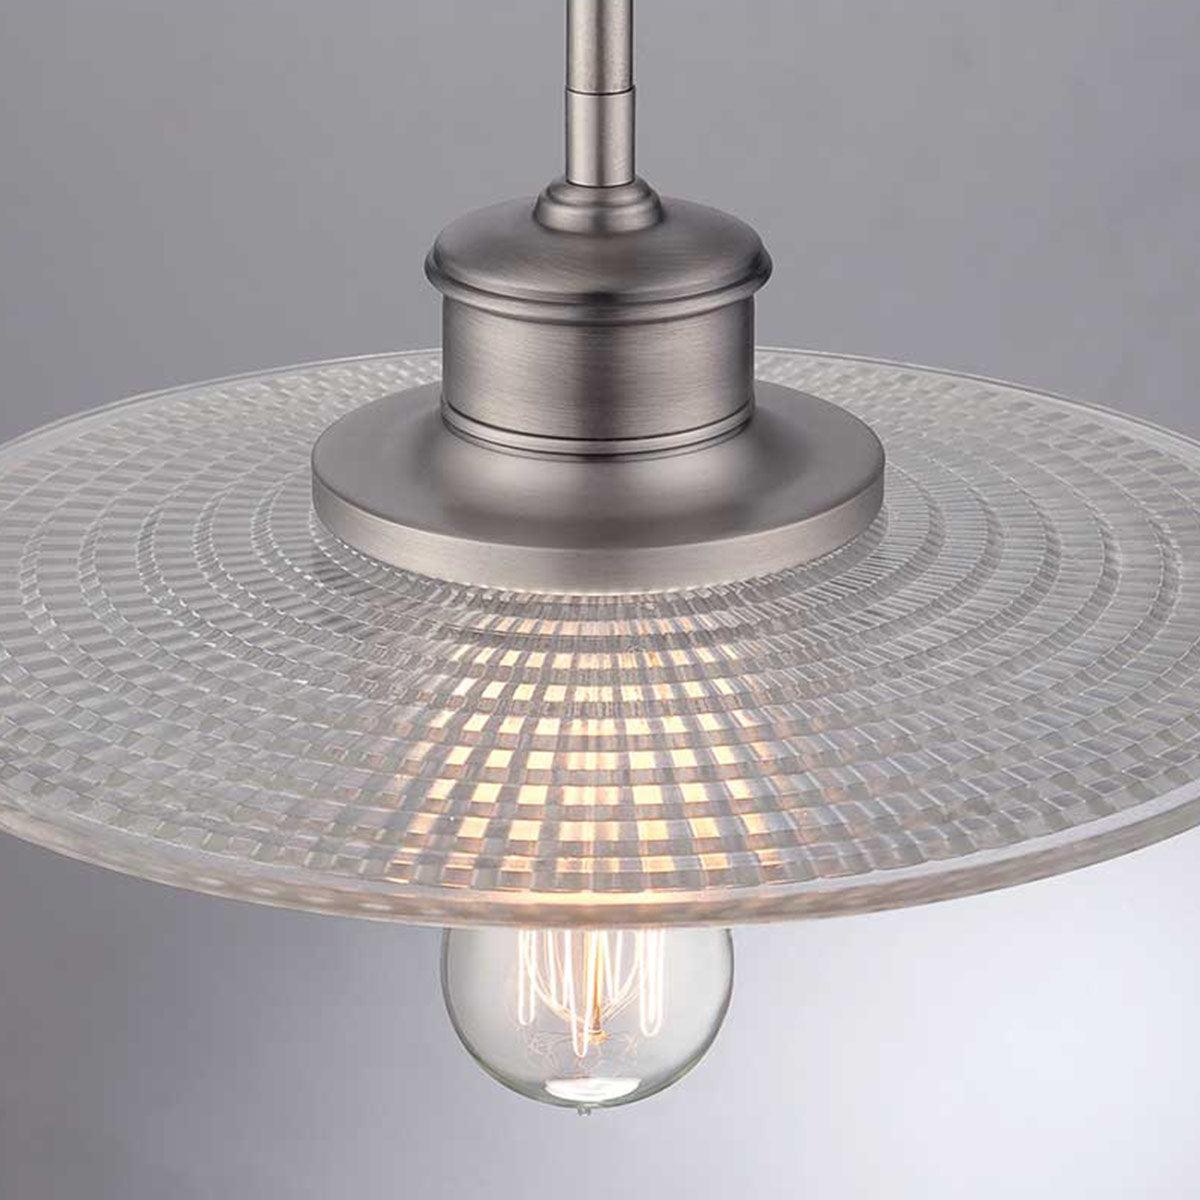 Elstead Lighting - QZ-ADMIRAL-P-AN - Quoizel Pendant from the Admiral range. Admiral 1 Light Mini Pendant - Nickel Product Code = QZ-ADMIRAL-P-AN